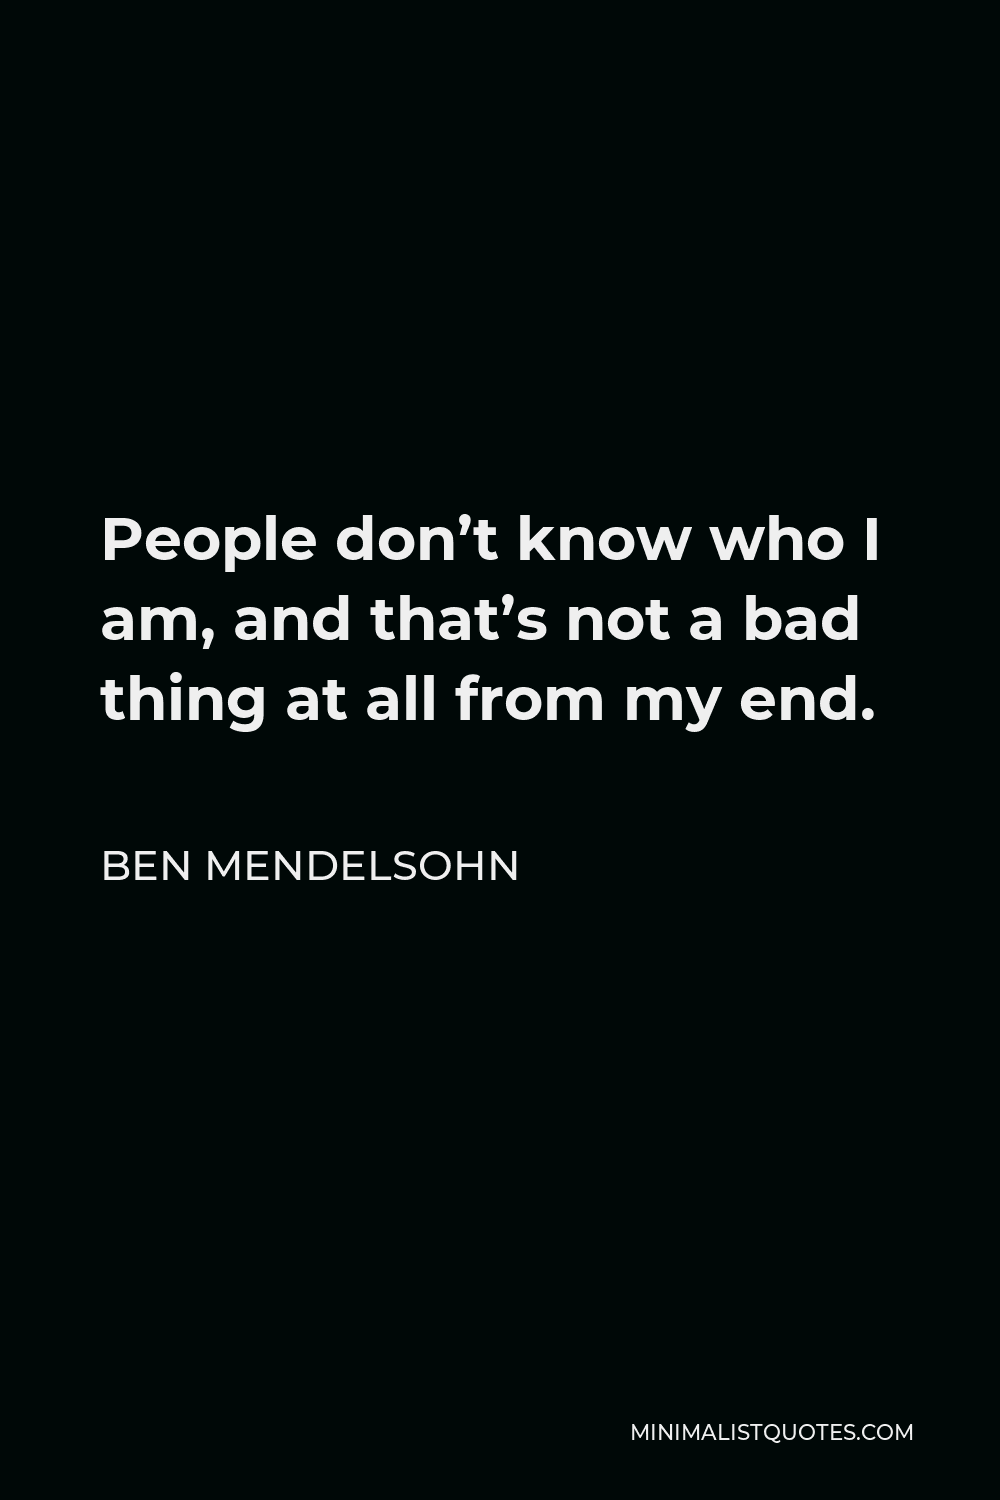 Ben Mendelsohn Quote - People don’t know who I am, and that’s not a bad thing at all from my end.